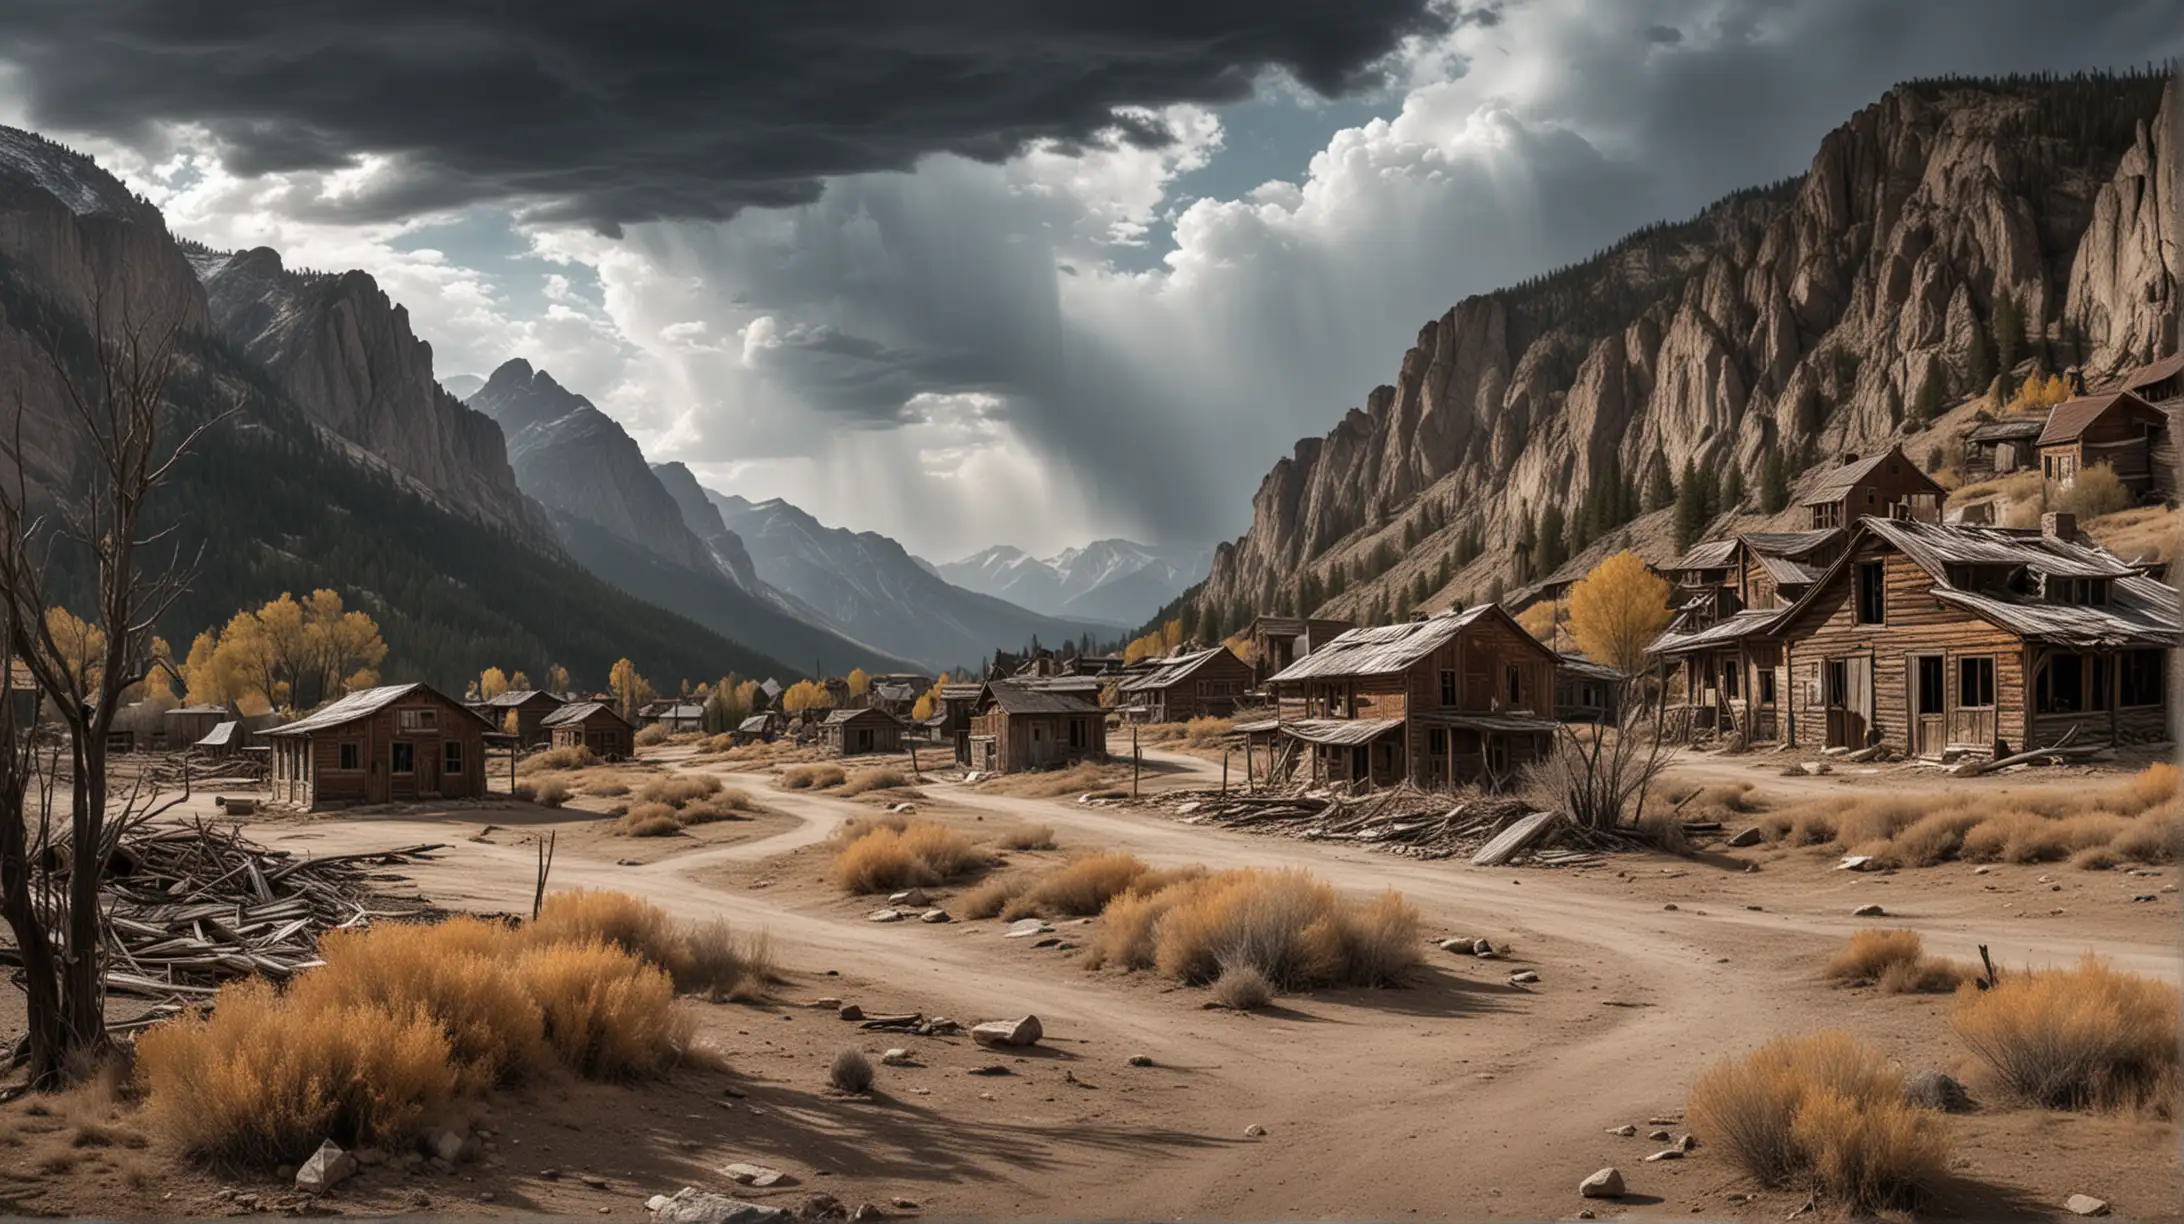 Deserted Ghost Town in the Rocky Mountains with Dramatic Sky